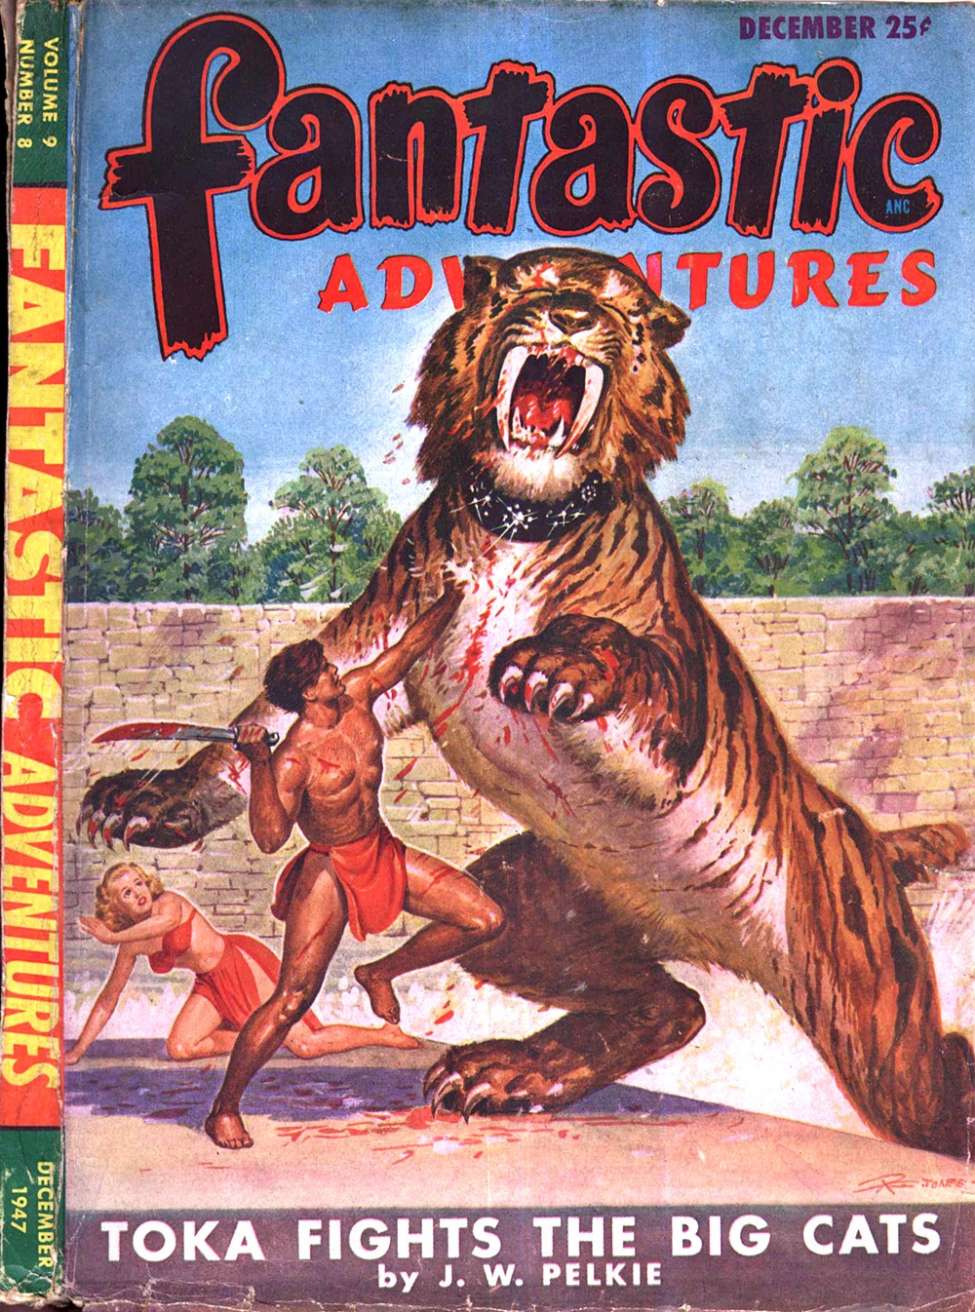 Comic Book Cover For Fantastic Adventures v9 8 - Toka Fights the Big Cats - J. W. Pelkie